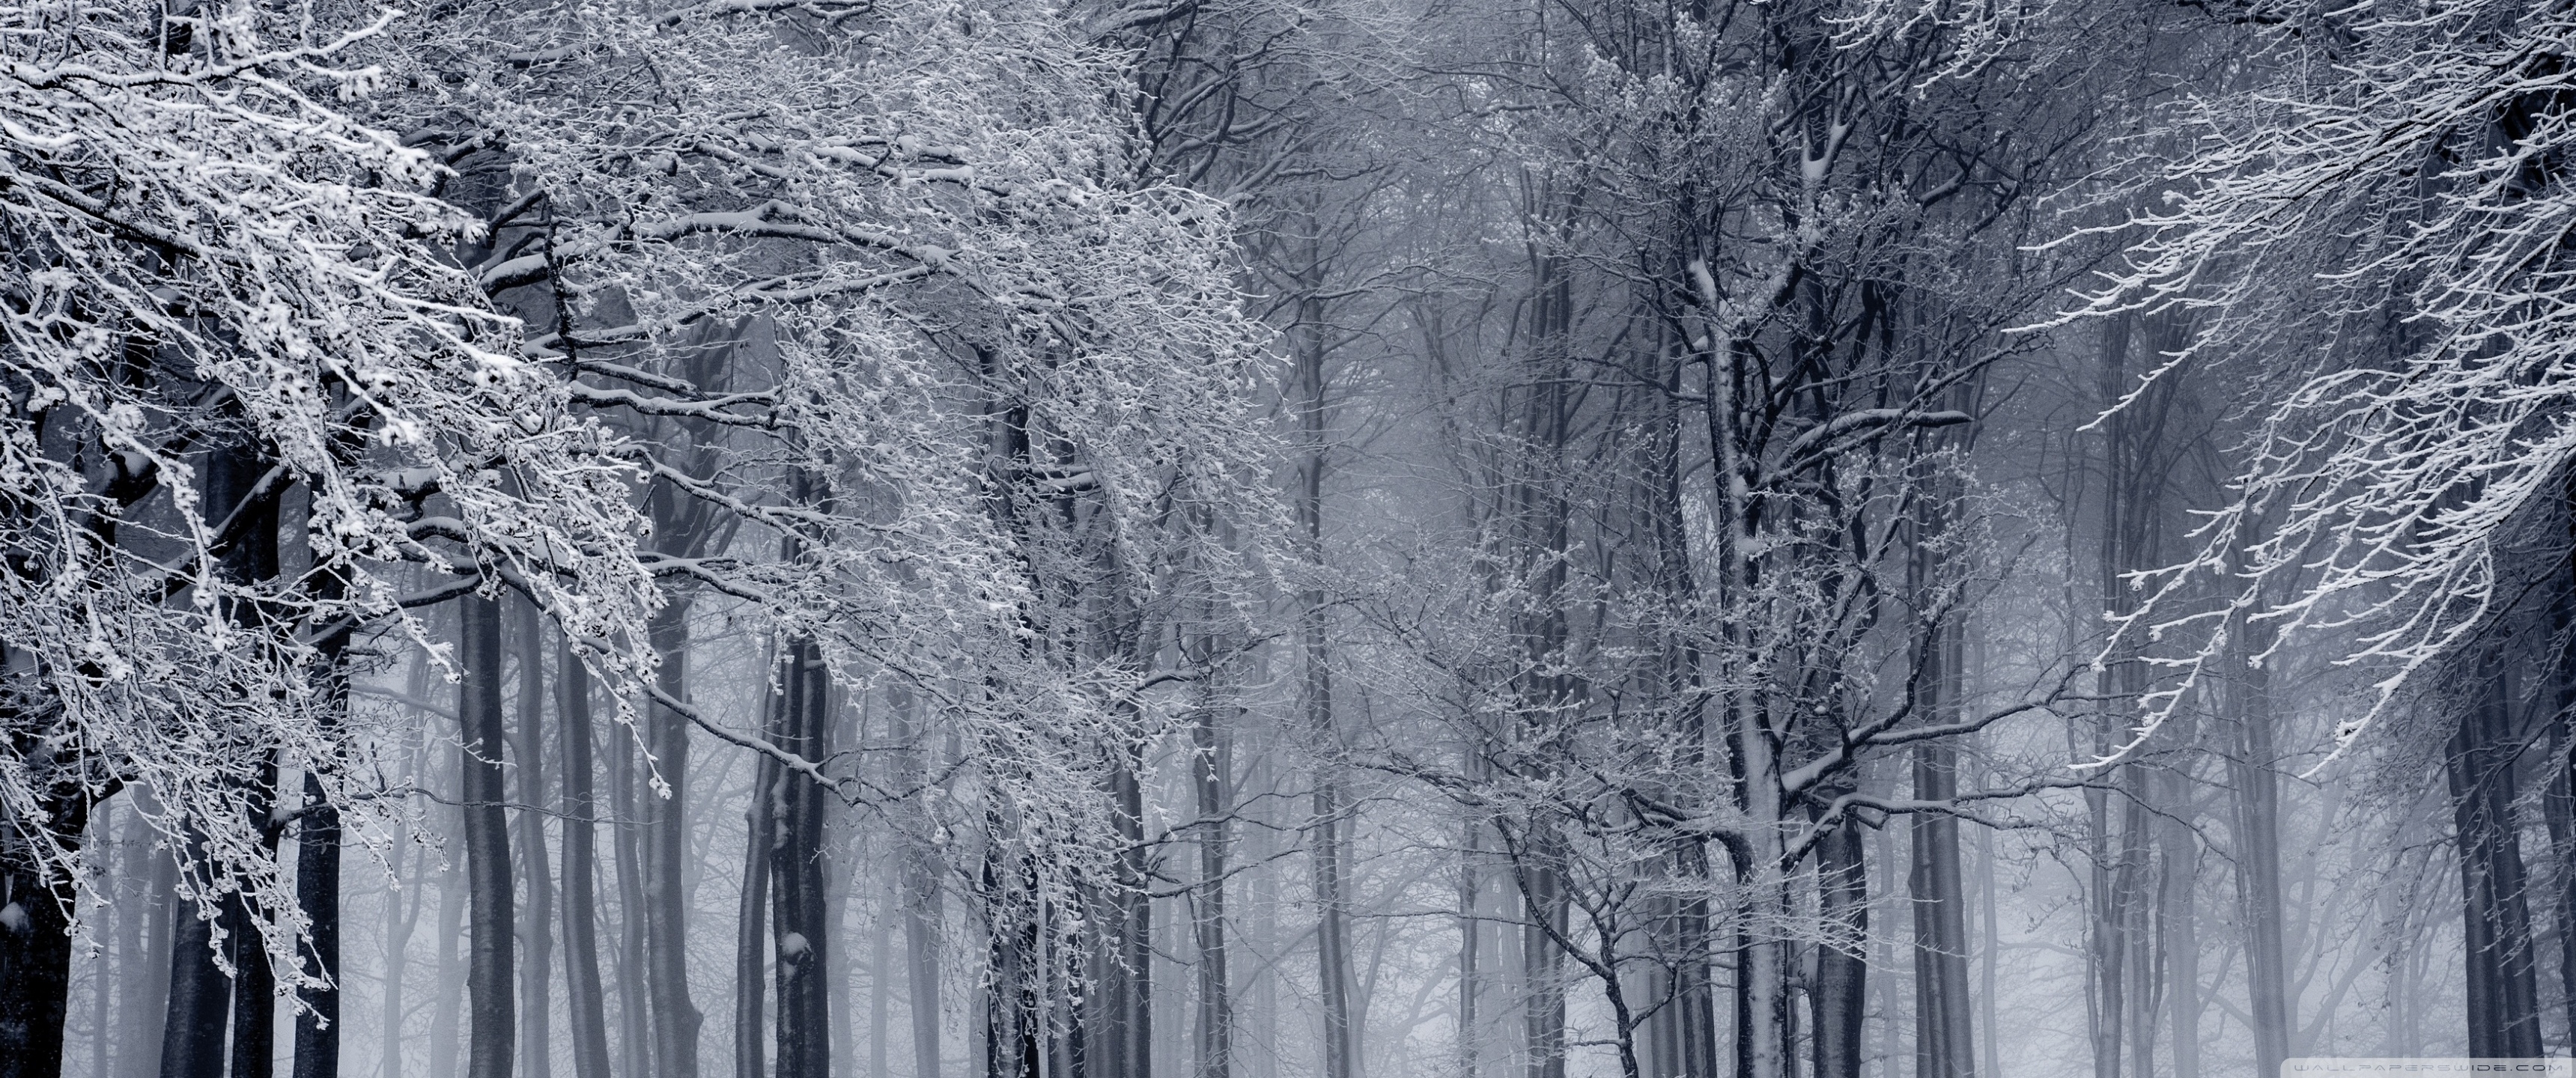 10 Latest Winter Forest Hd Wallpaper FULL HD 1920×1080 For PC Background